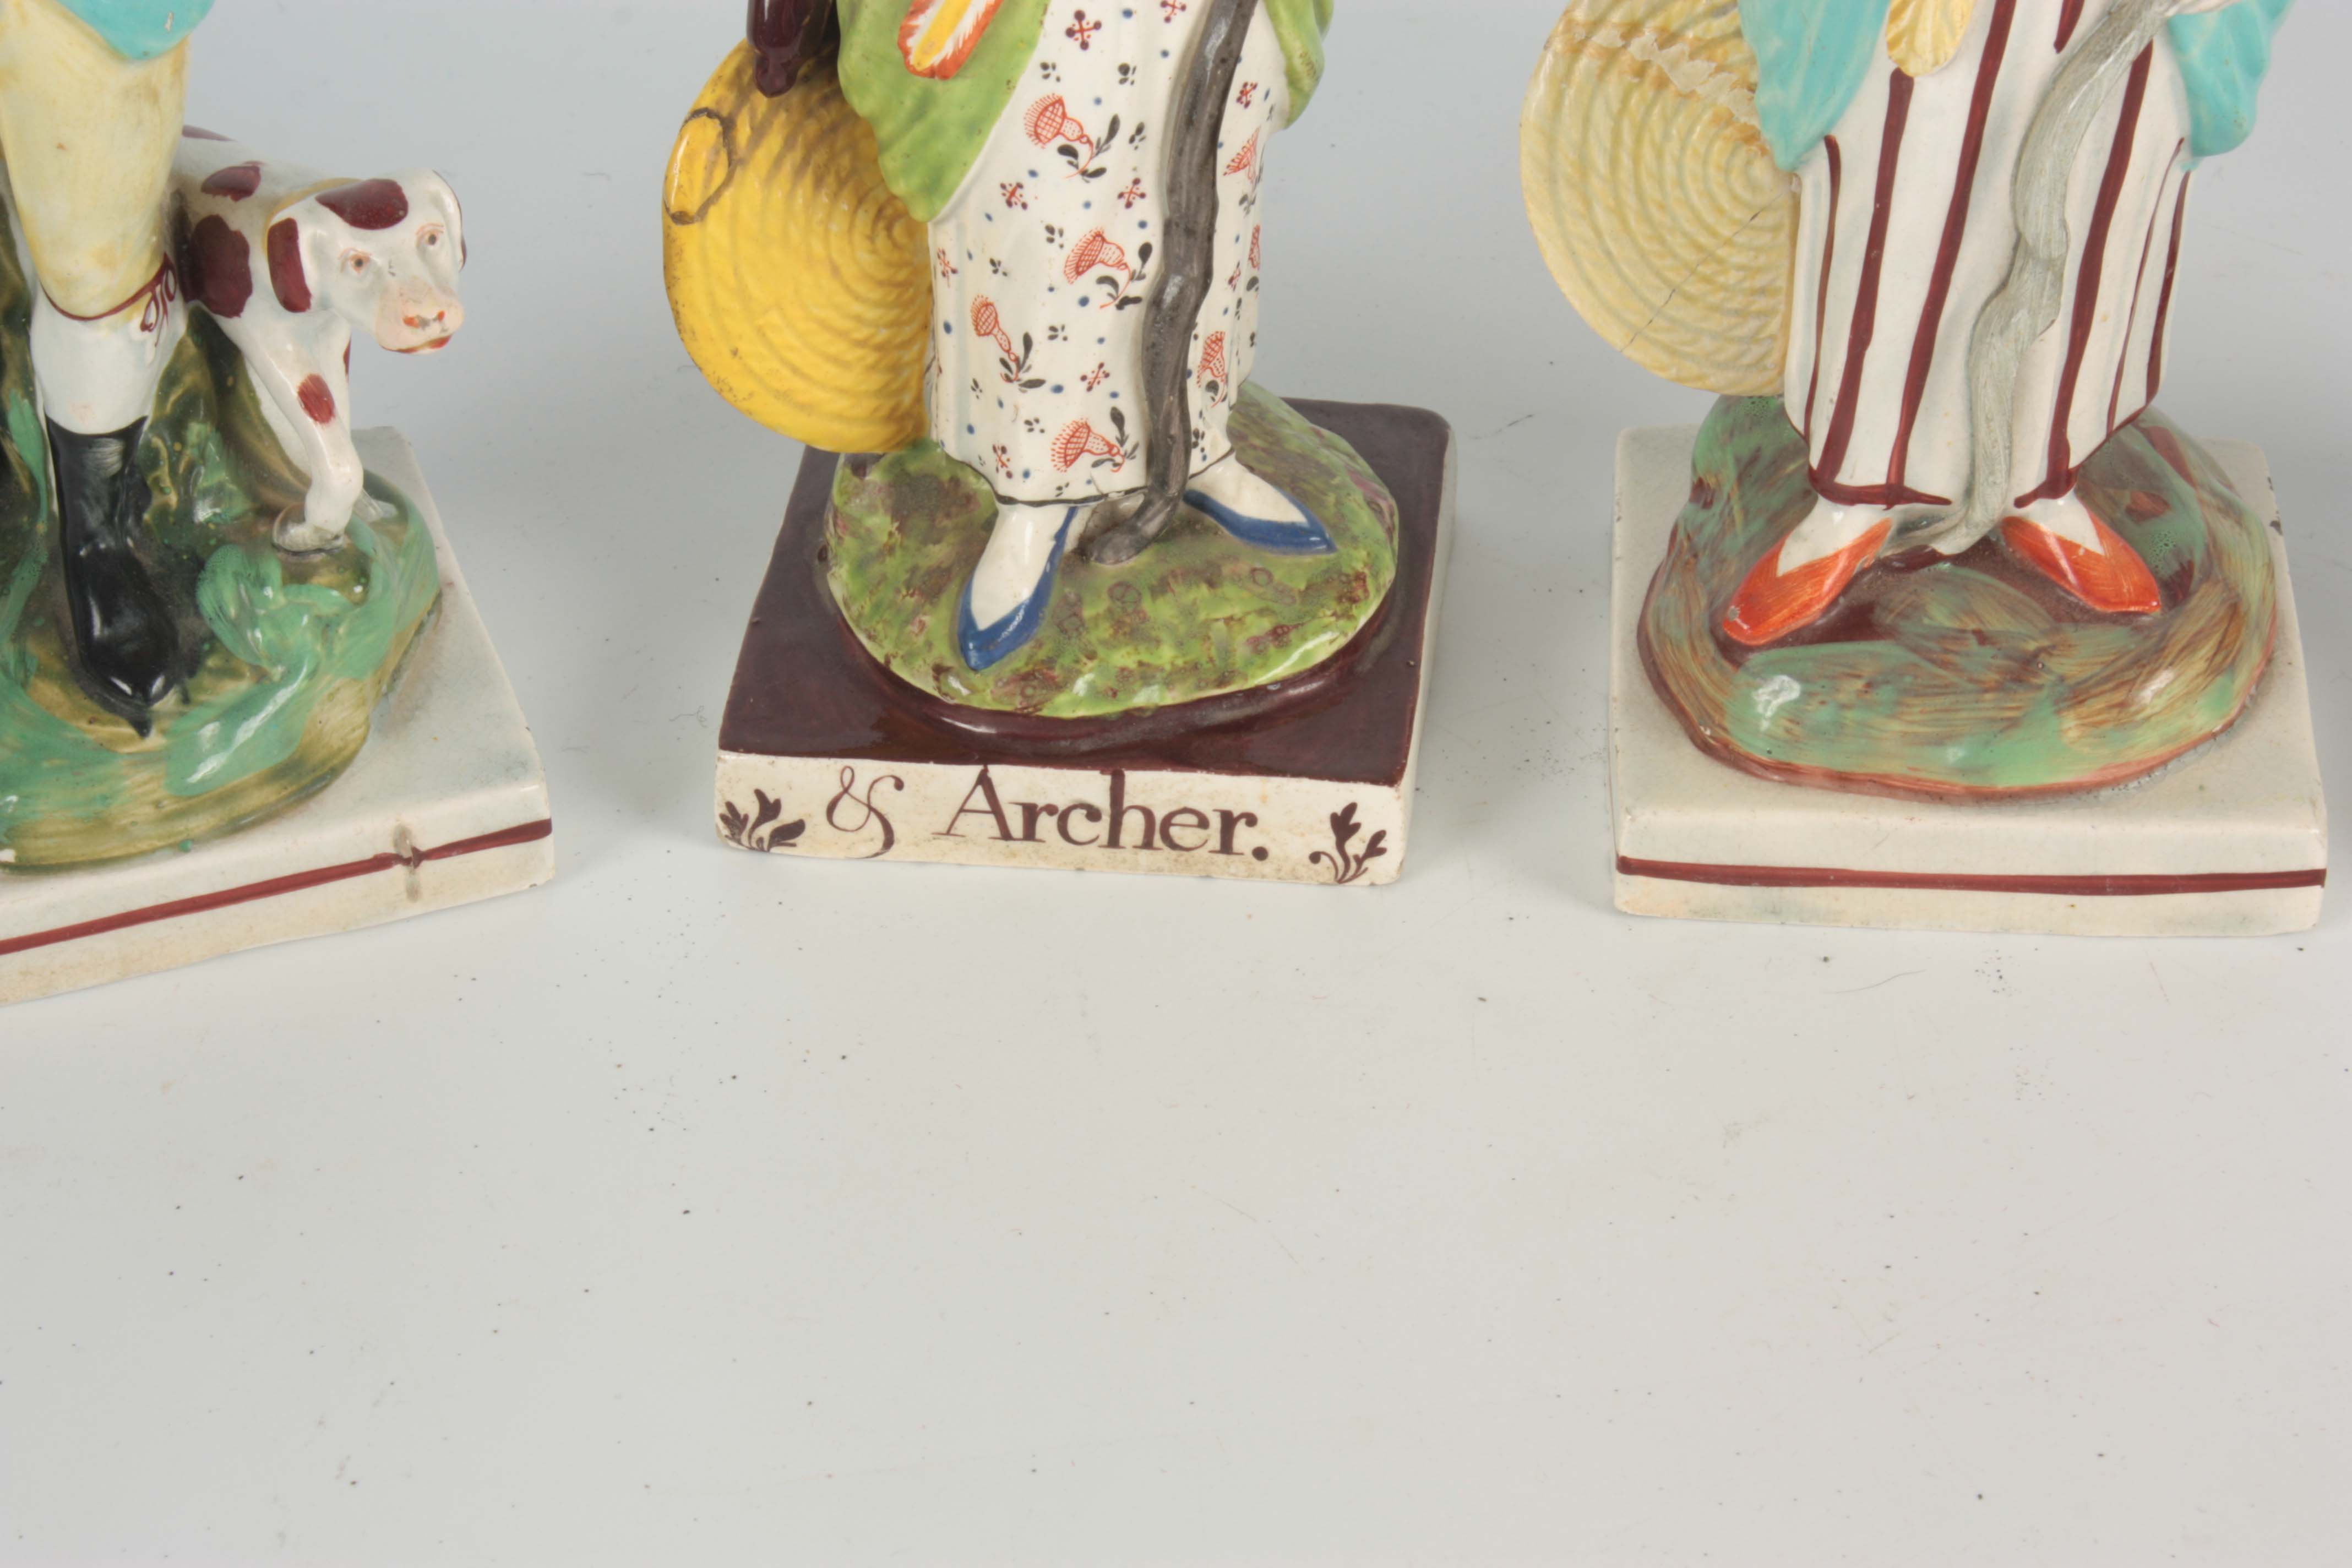 A PAIR OF 19TH CENTURY STAFFORDSHIRE STANDING FIGURES titled 'SPORTSMAN' and 'ARCHER' 18cm high - Image 2 of 4